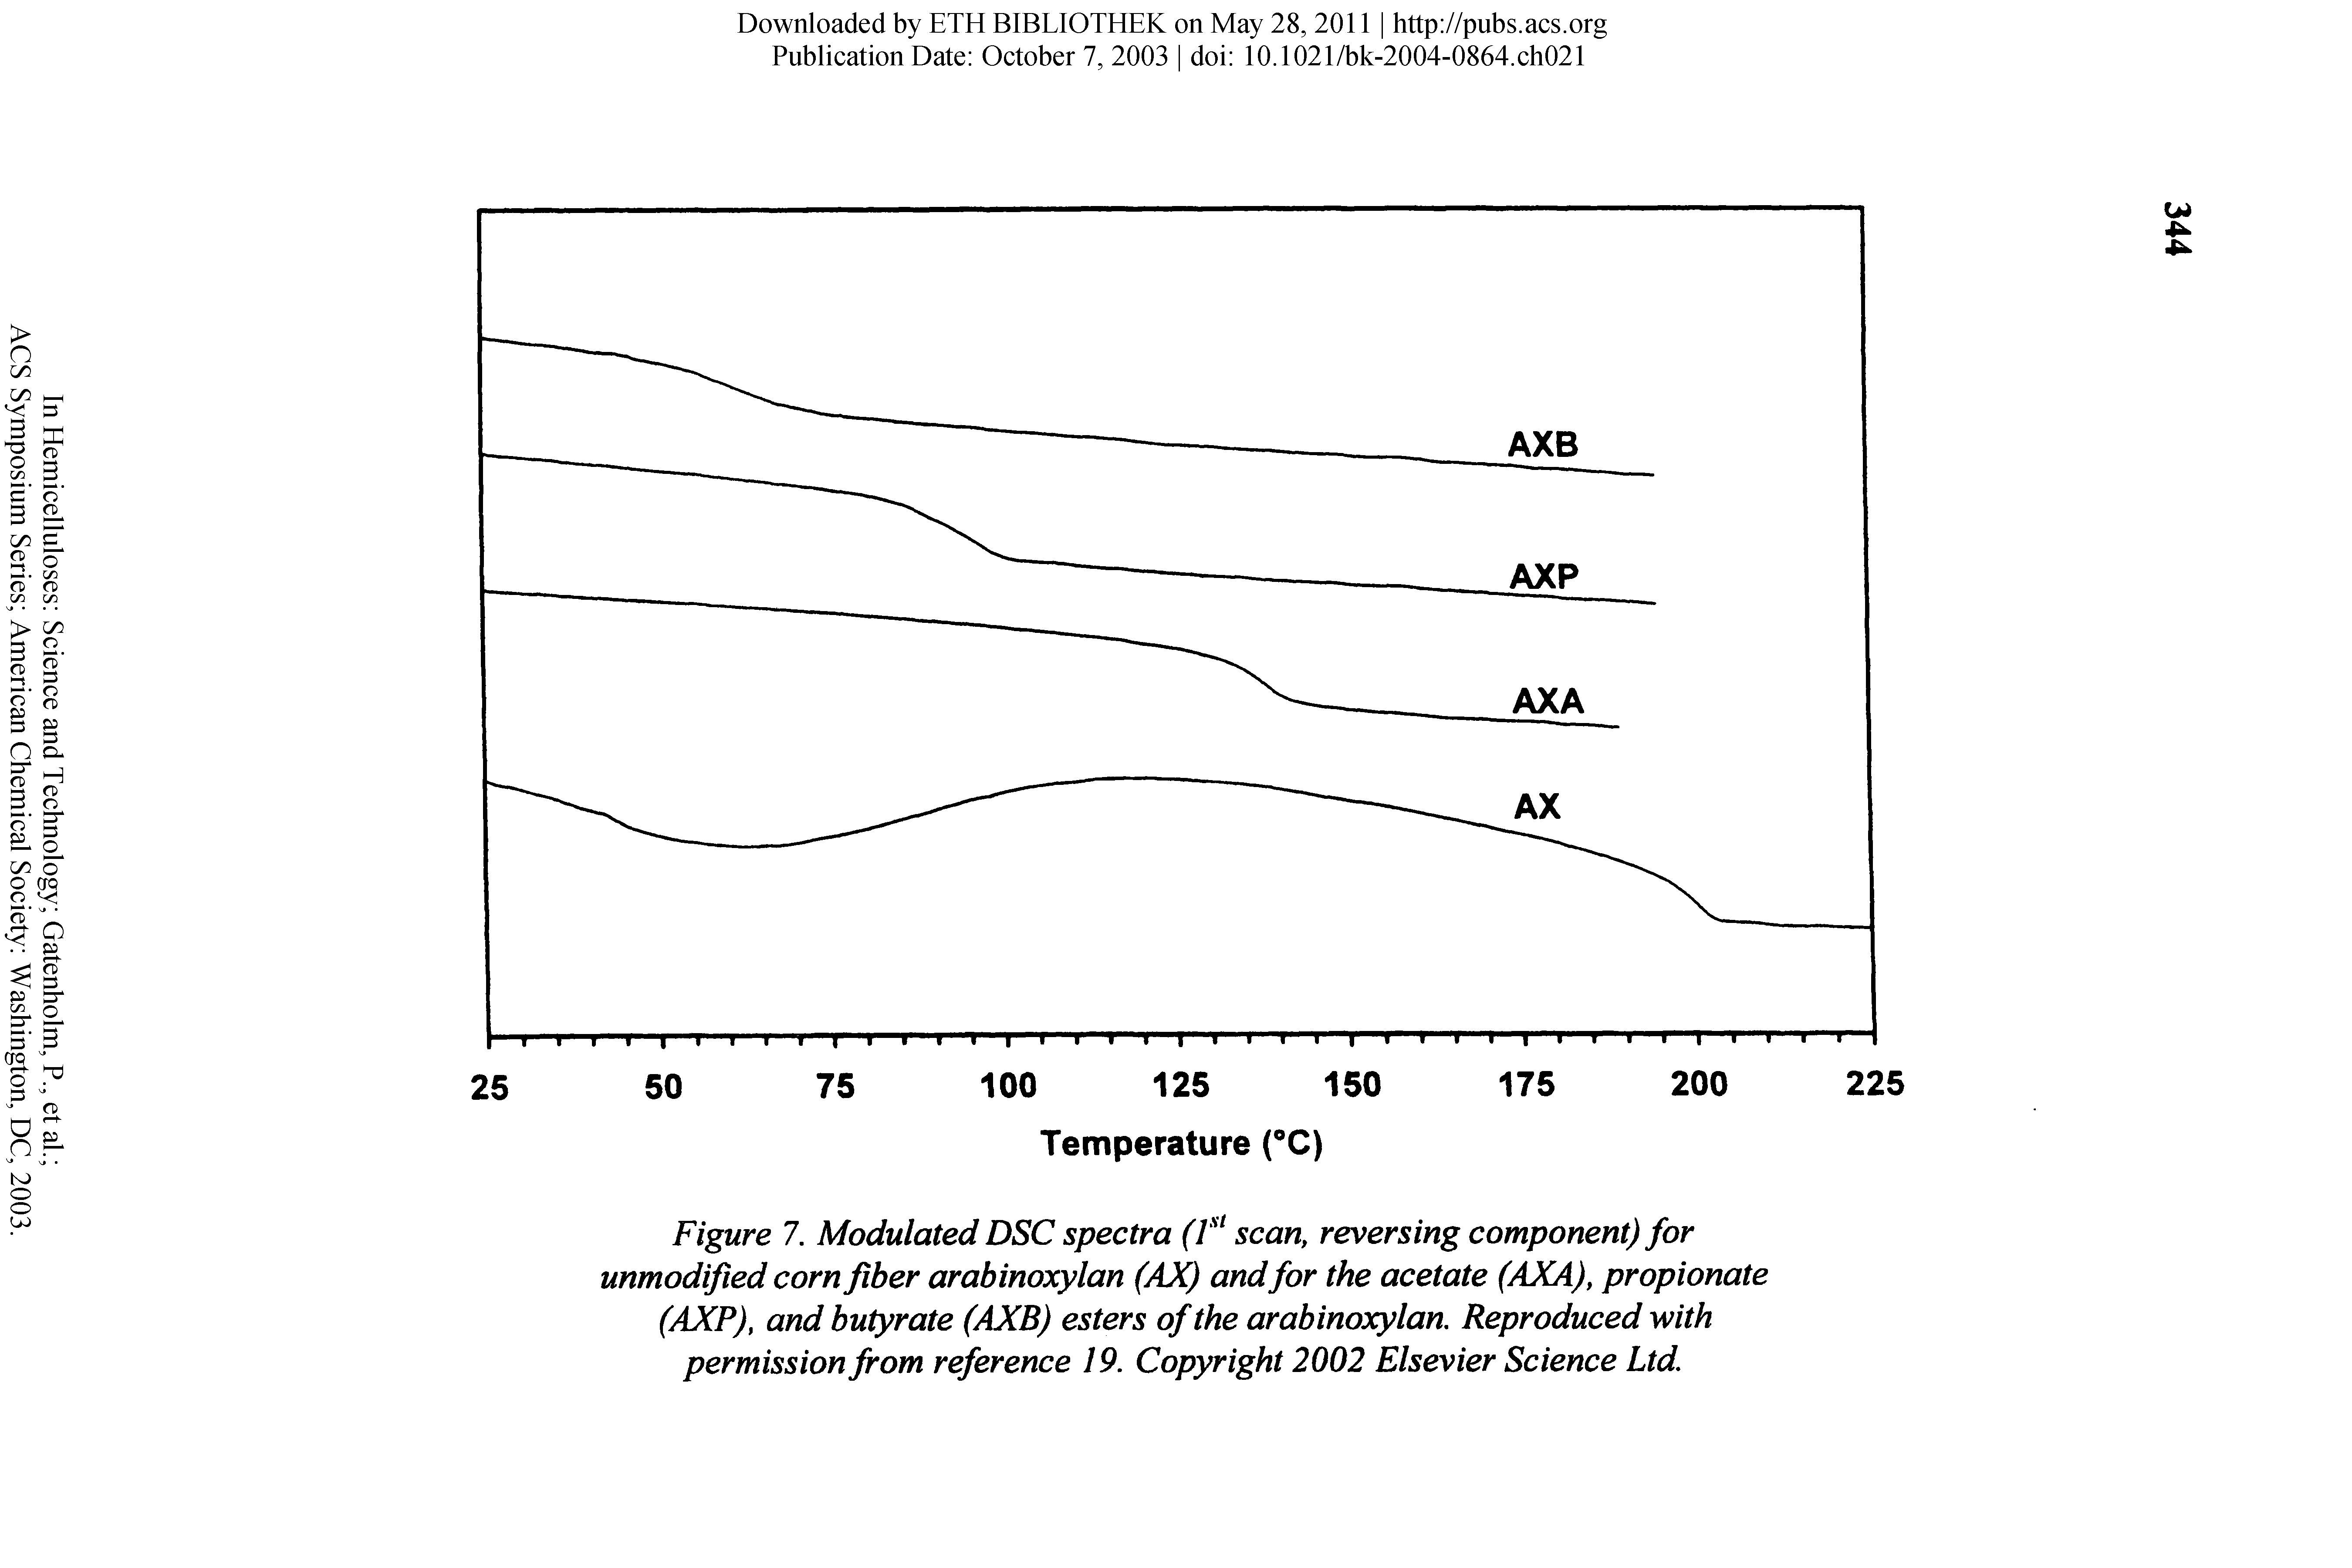 Figure 7. Modulated DSC spectra scan, reversing component) for unmodified corn fiber arabinoxylan (AX) andfor the acetate (AXA), propionate (AXP), and butyrate (AXB) esters of the arabinoxylan. Reproduced with permission from reference 19. Copyright 2002 Elsevier Science Ltd.